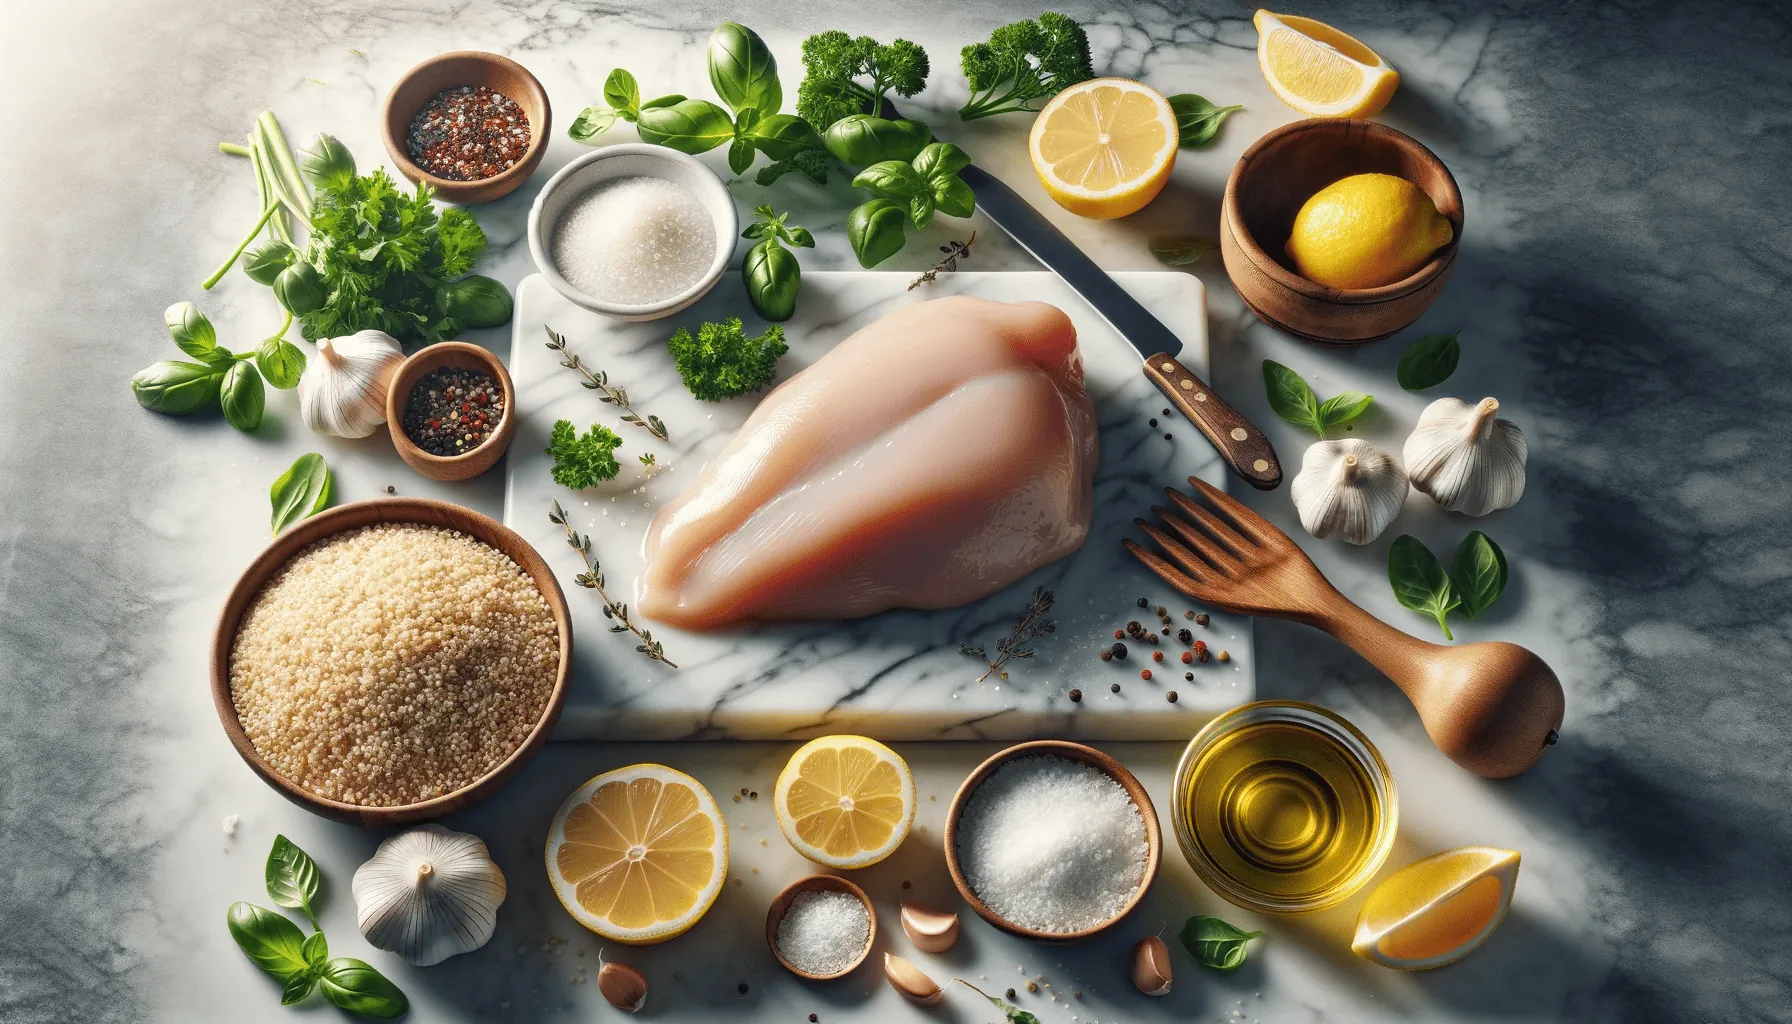 Ingredients for the recipe, including quinoa, chicken broth, lemons, olive oil, fresh herbs, and chicken breasts, are arranged